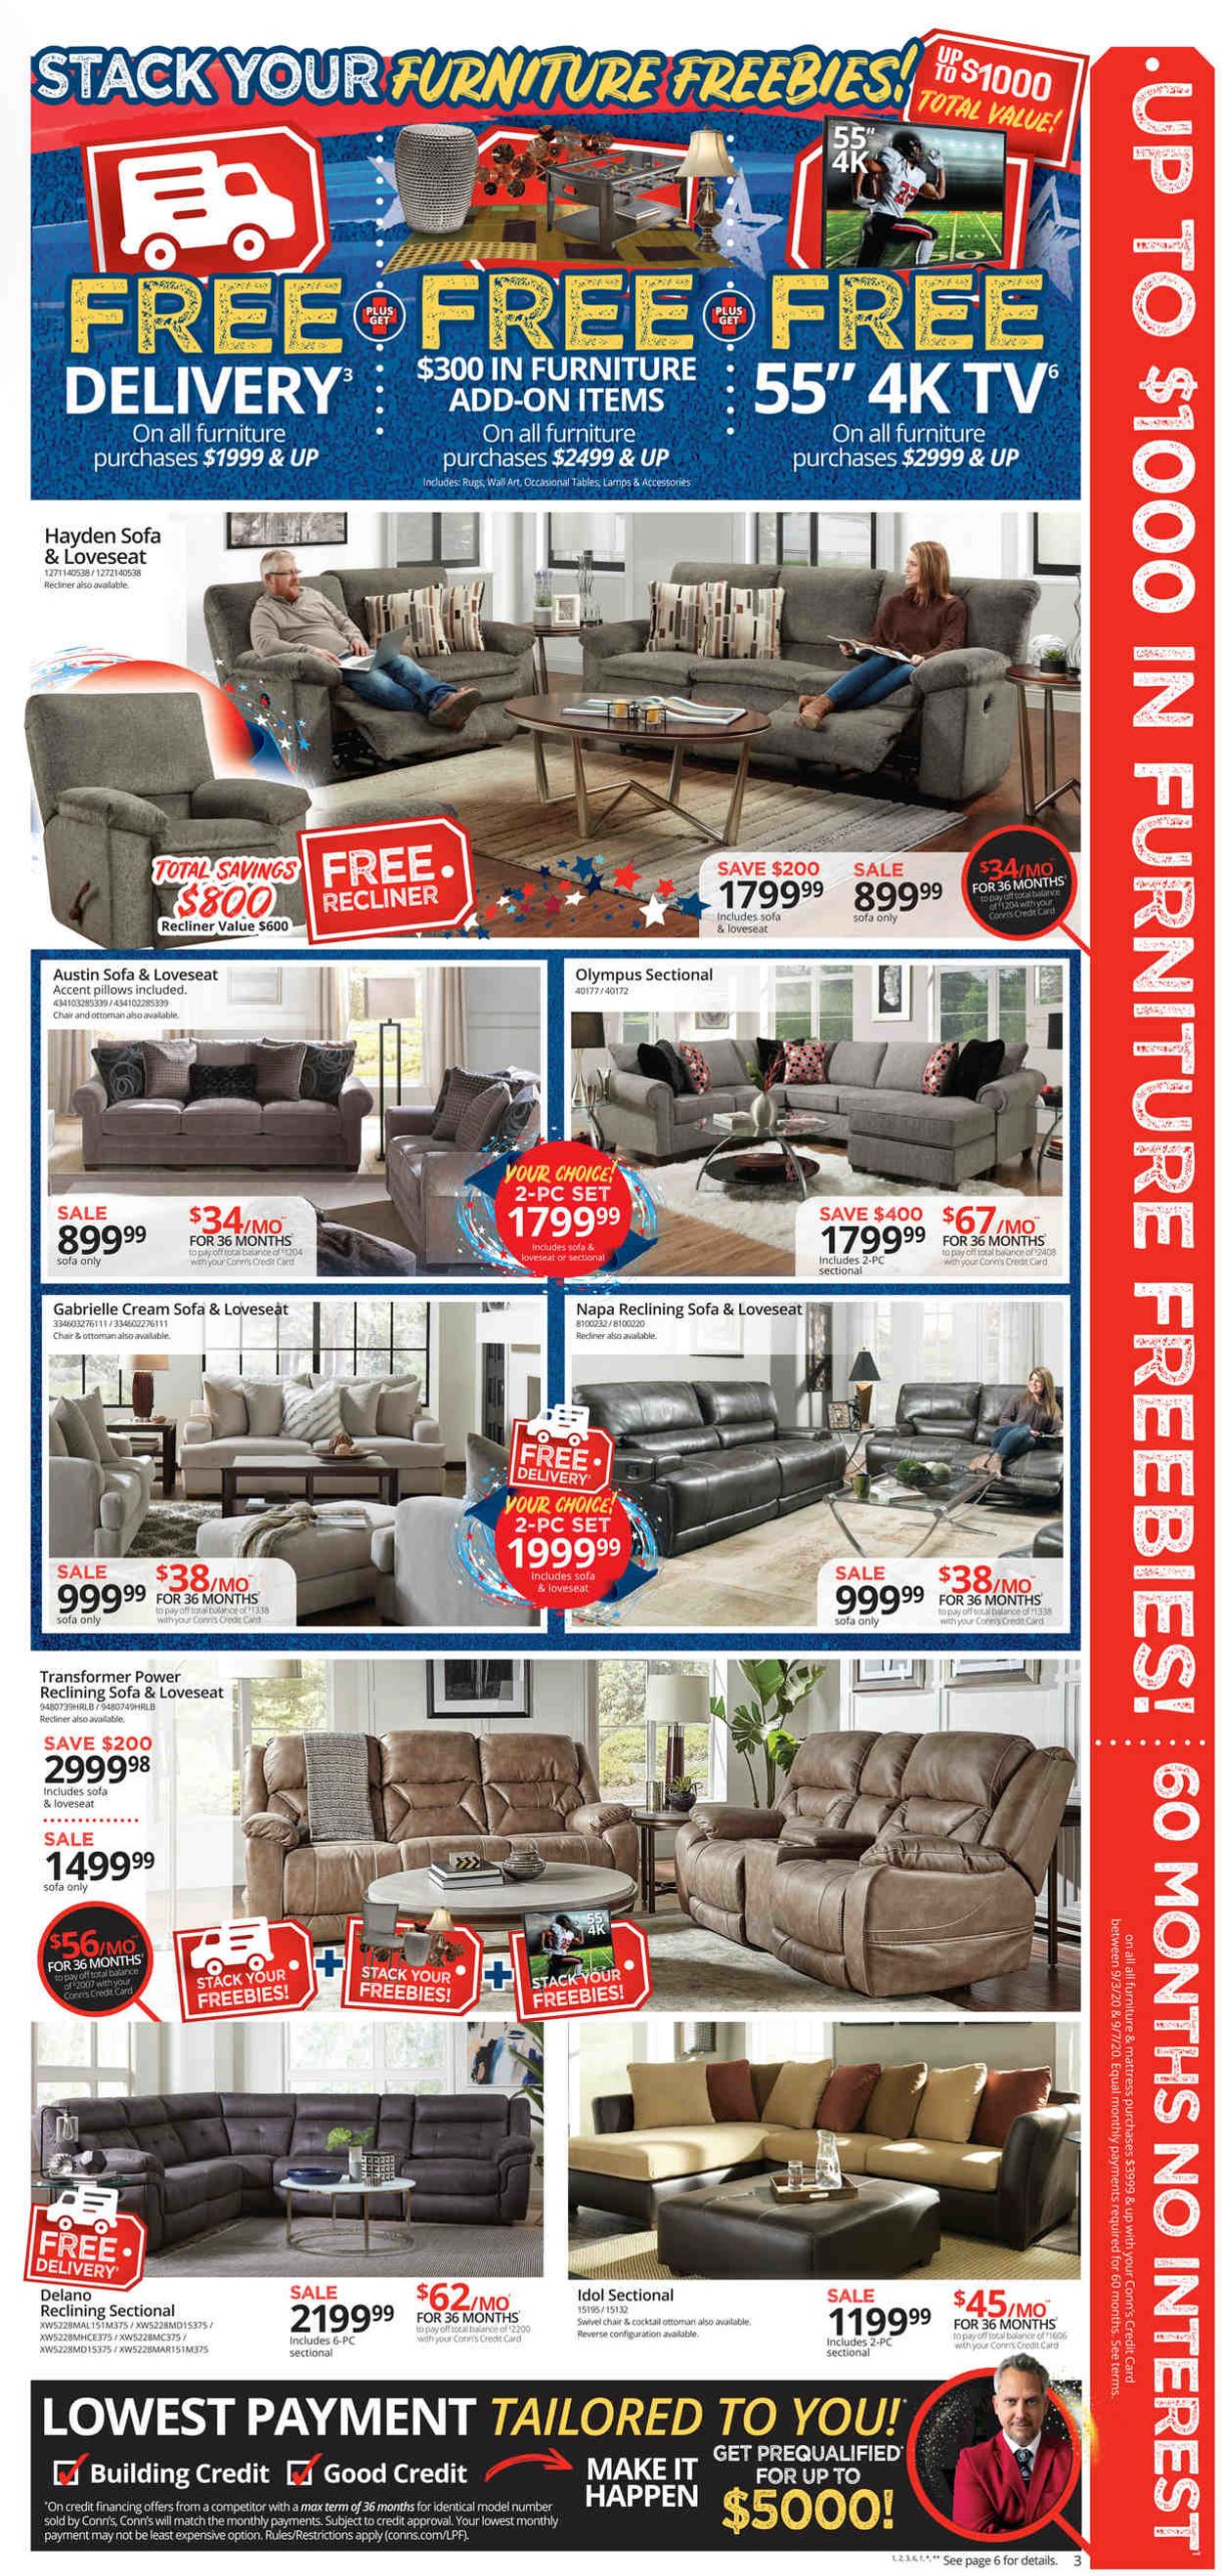 Conn's Home Plus Weekly Ad Circular - valid 09/03-09/07/2020 (Page 3)